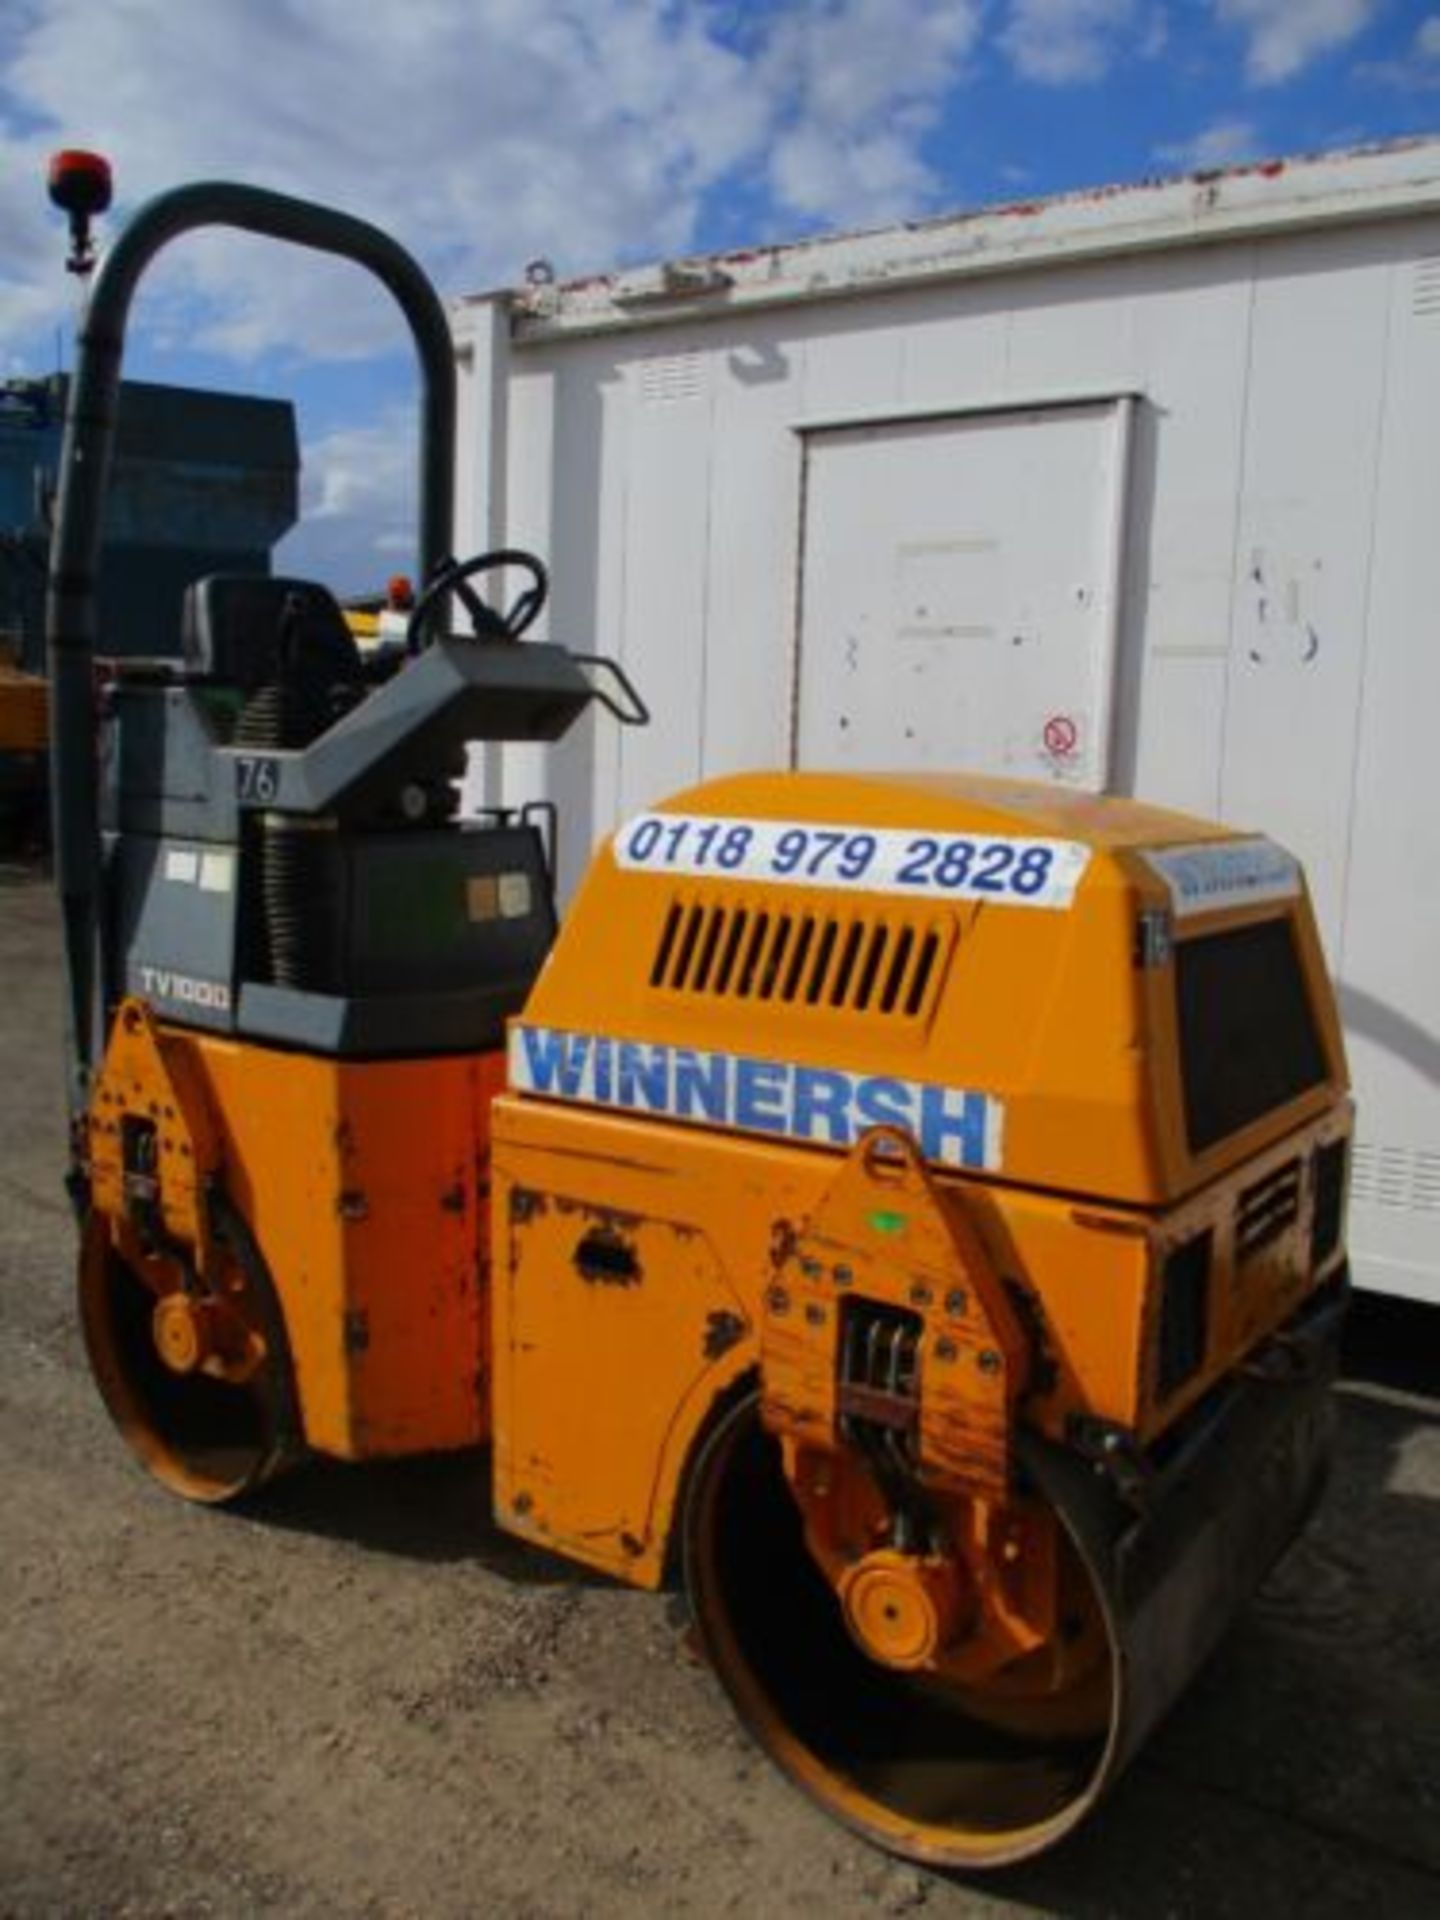 TEREX BENFORD TV 1000 VIBRATING ROLLER 120 80 RIDE ON BOMAG BW 1200 DELIVERY - Image 9 of 10